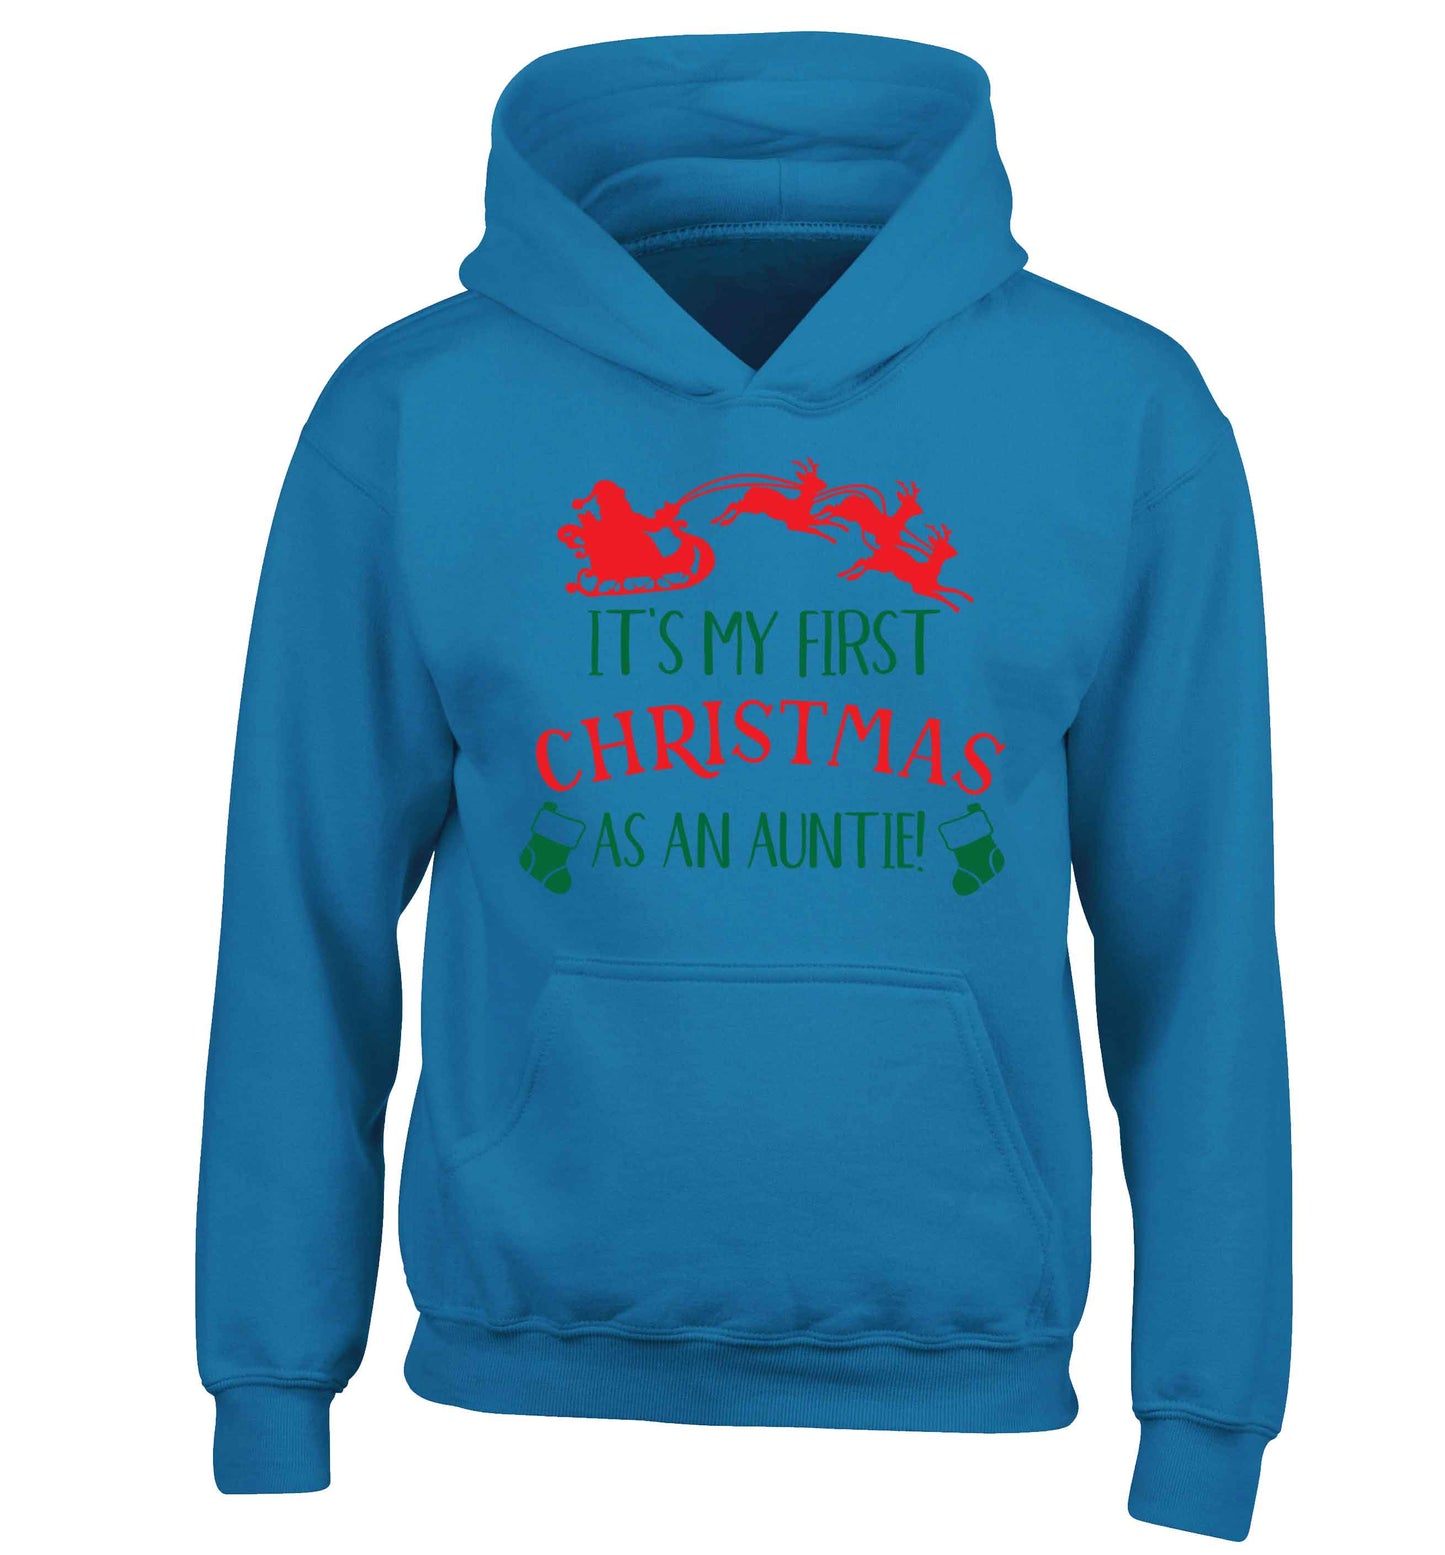 It's my first Christmas as an auntie! children's blue hoodie 12-13 Years